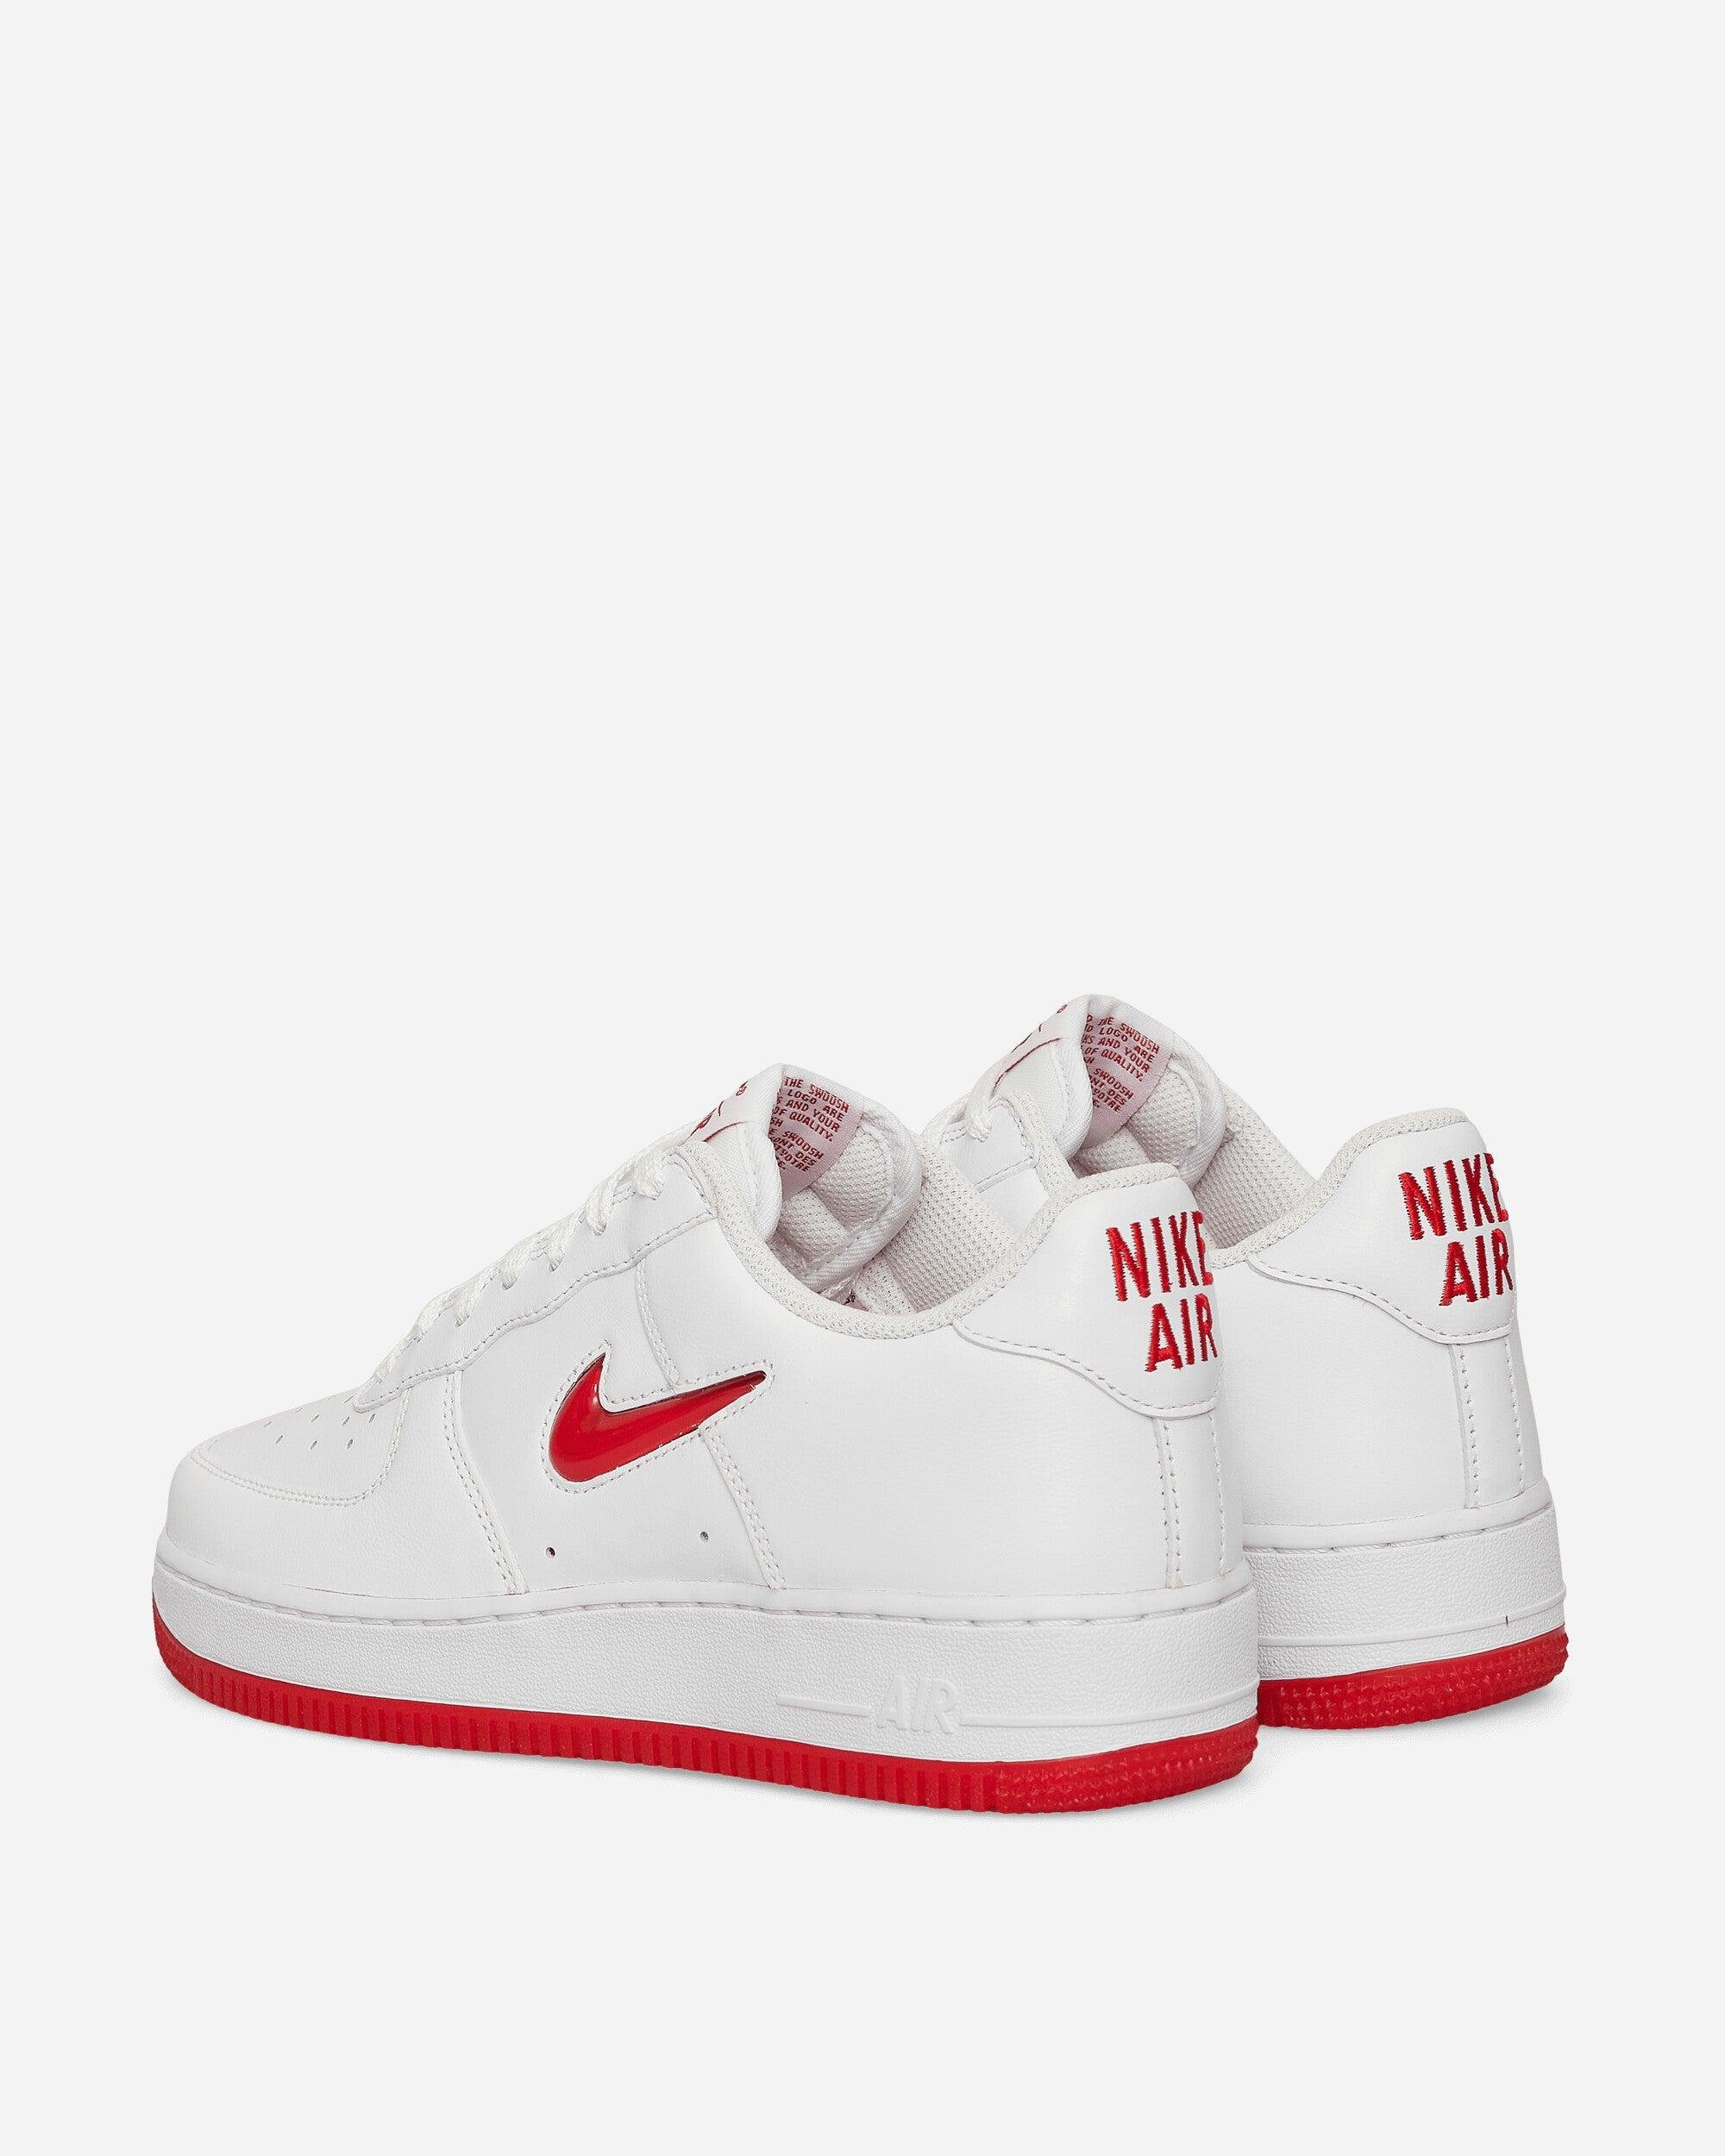 Nike Air Force 1 Low Retro 'University Red/White